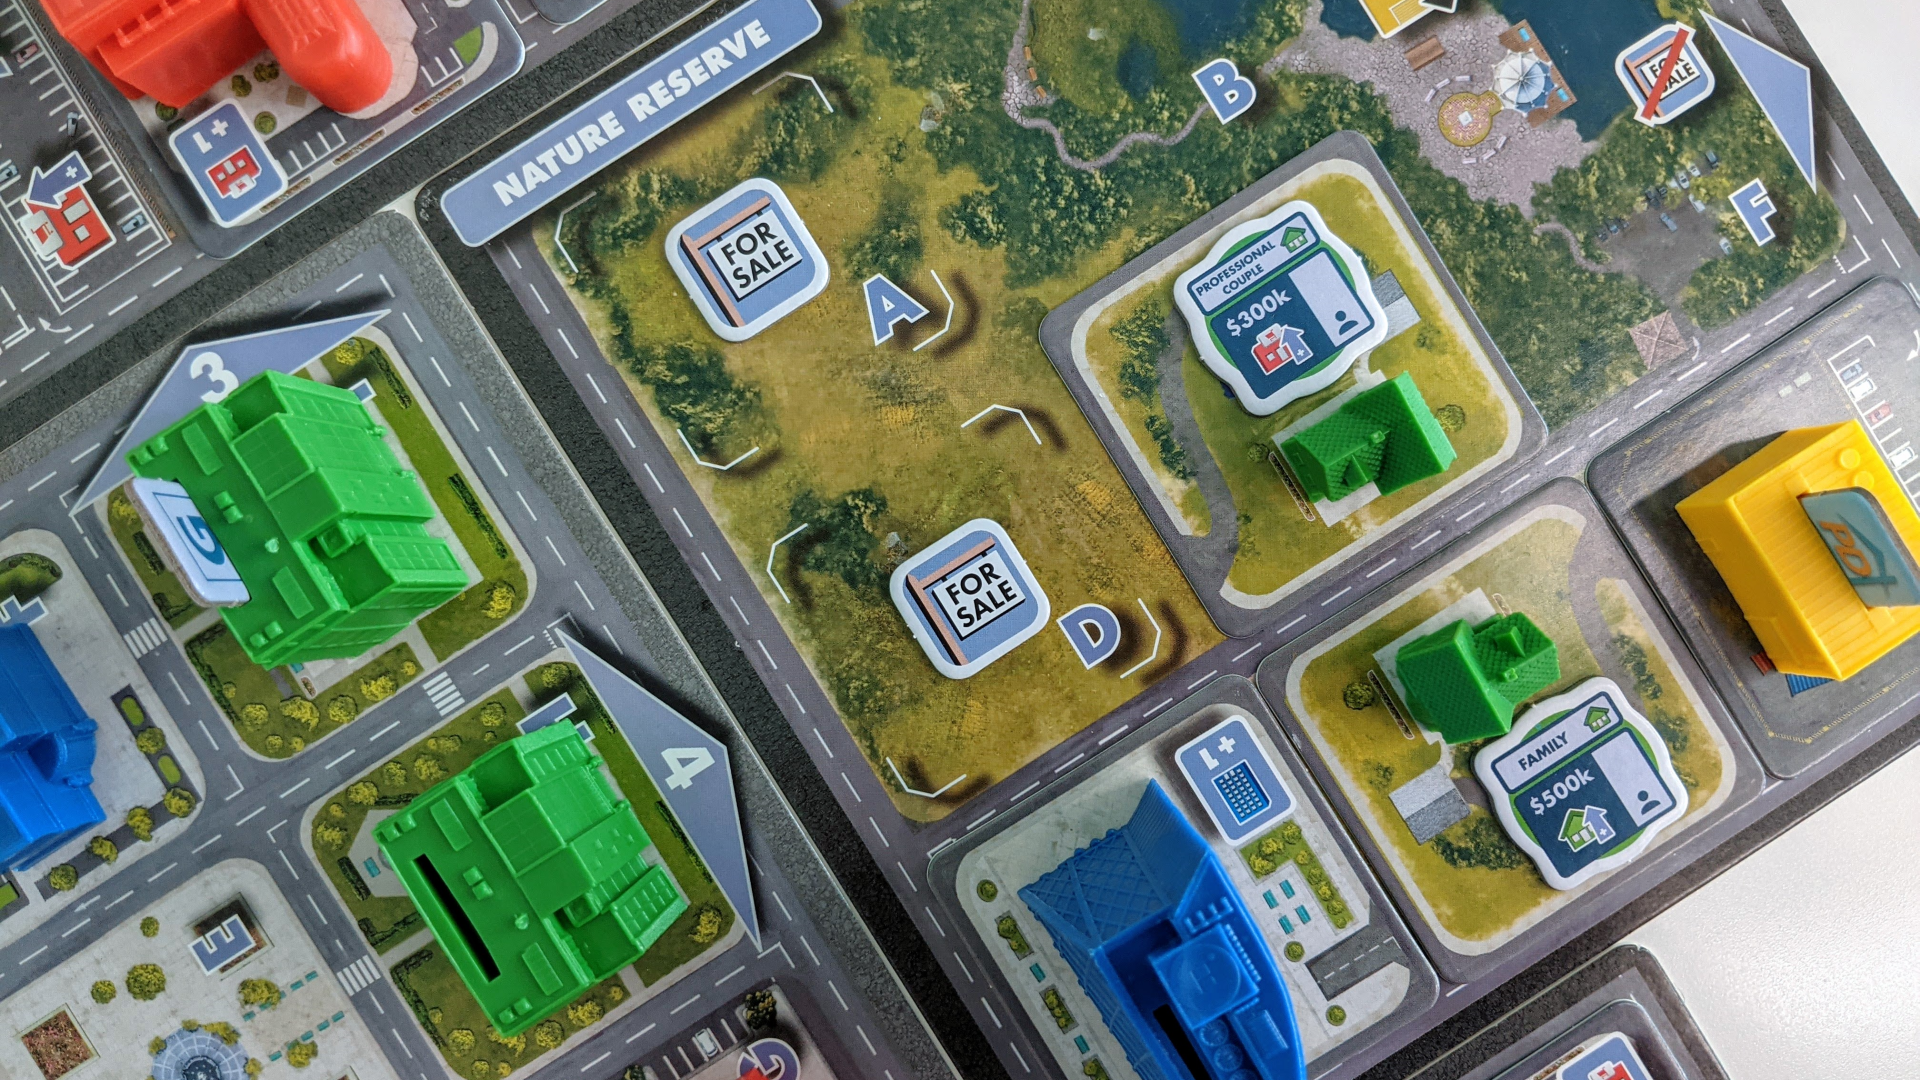 Image for Magnate: The First City is a metro-building board game striving for realism and interactivity